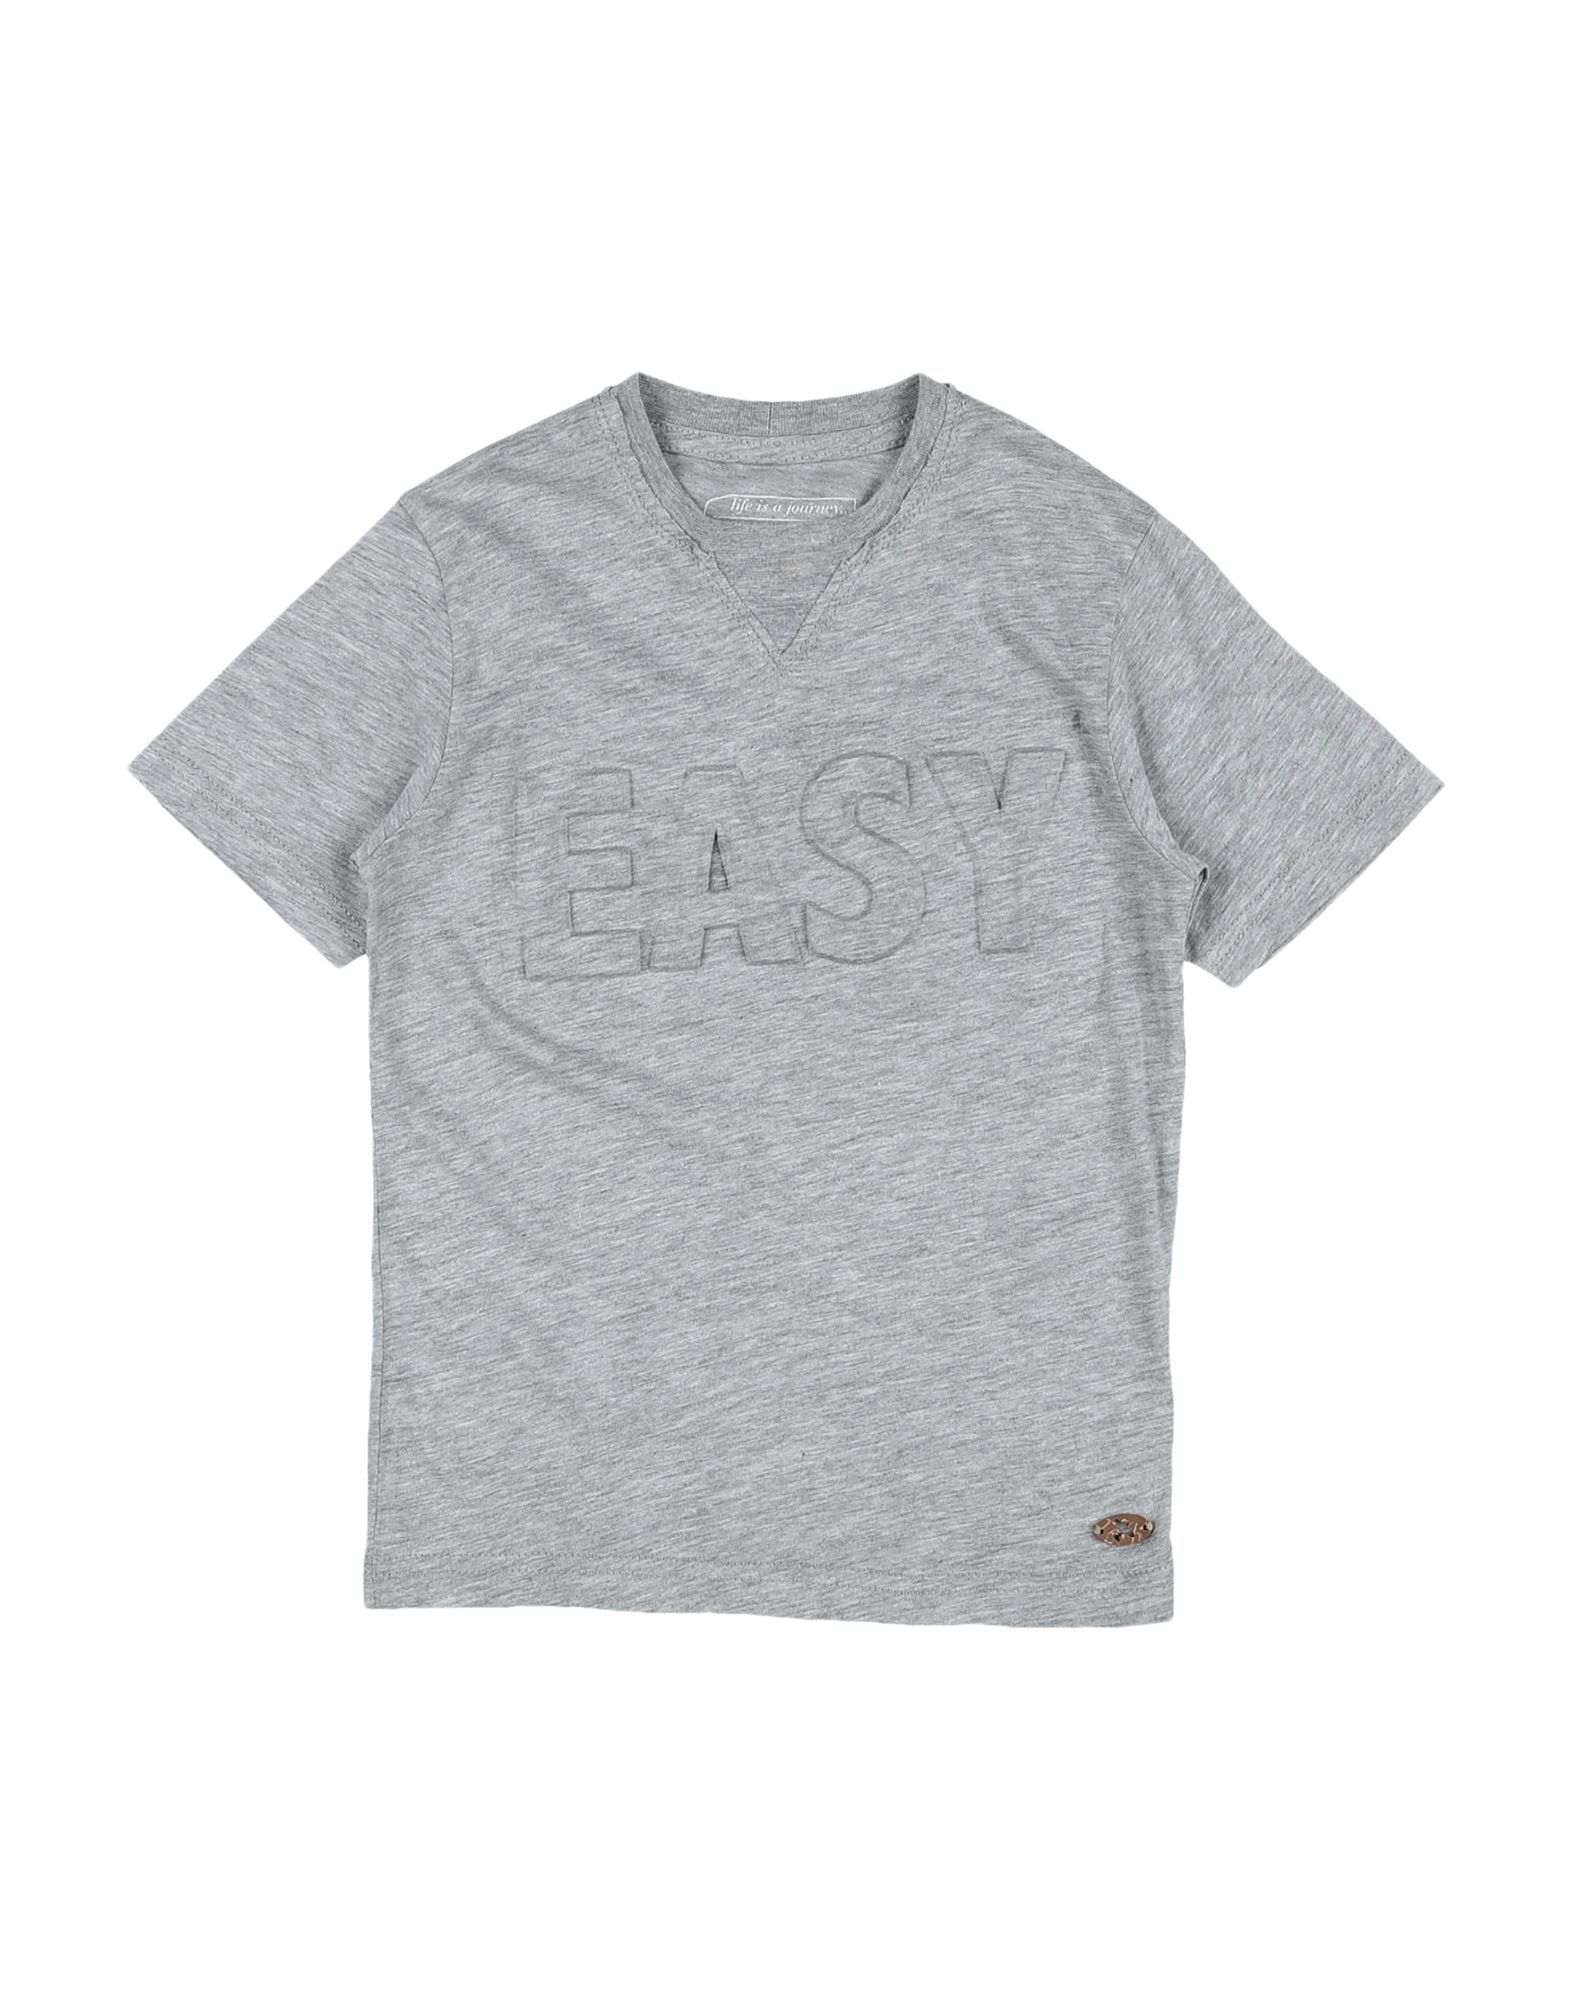 Sp1 Kids' T-shirts In Grey